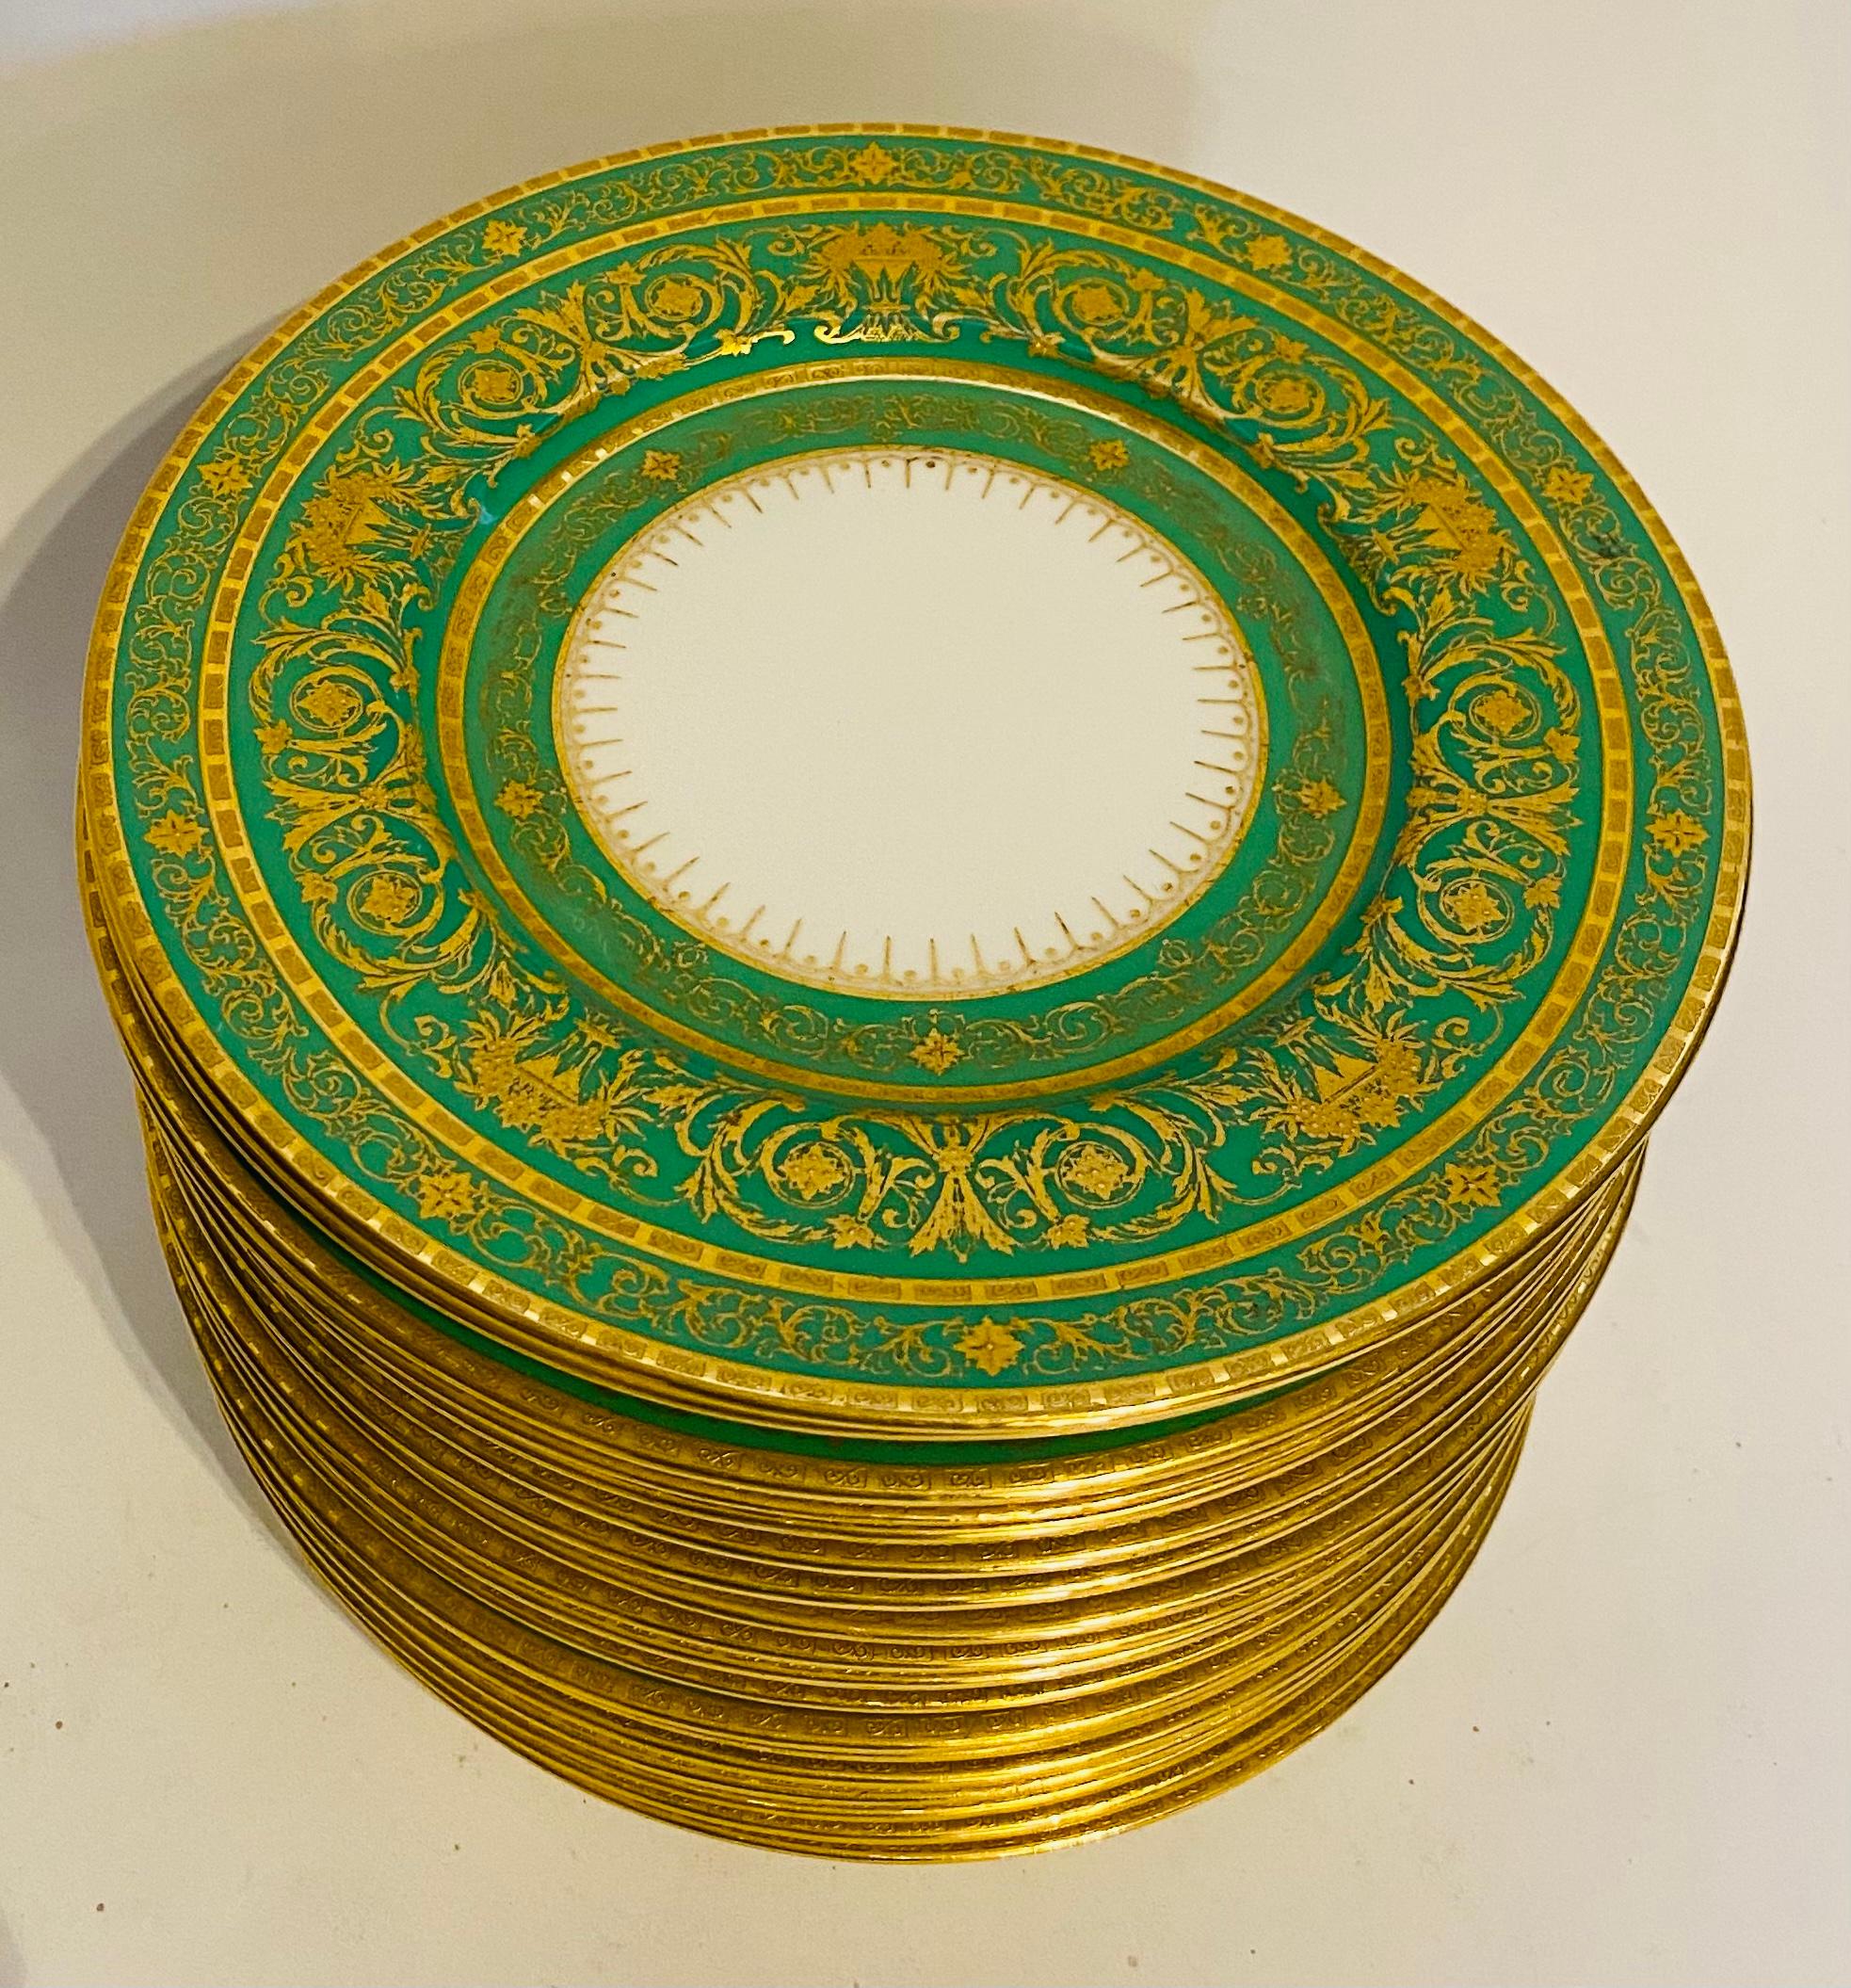 A vibrant and elegant set of plates by the re known Gilded Age Porcelain firm of Minton England. This set was custom ordered through a fine retailer D.B King of Detroit known for stocking lavish and high quality table top at the turn of the last